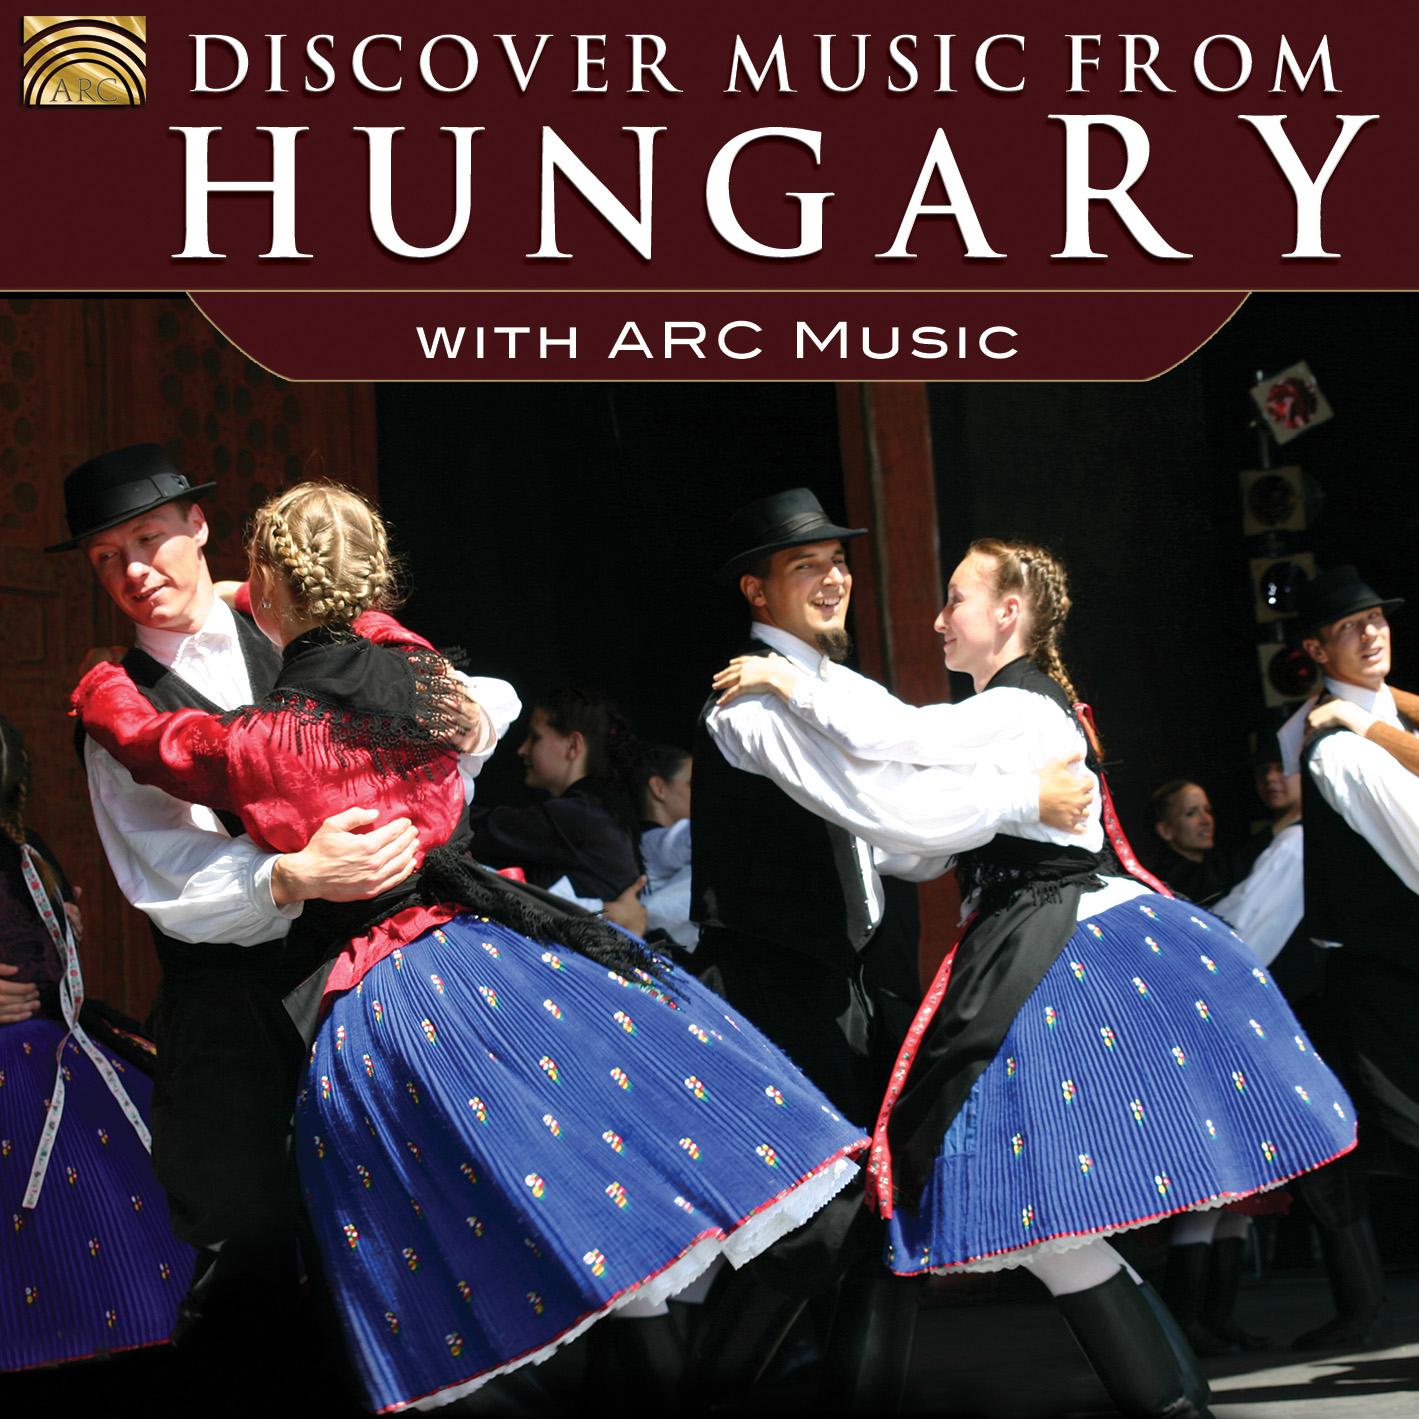 Discover World Music with ARC Music